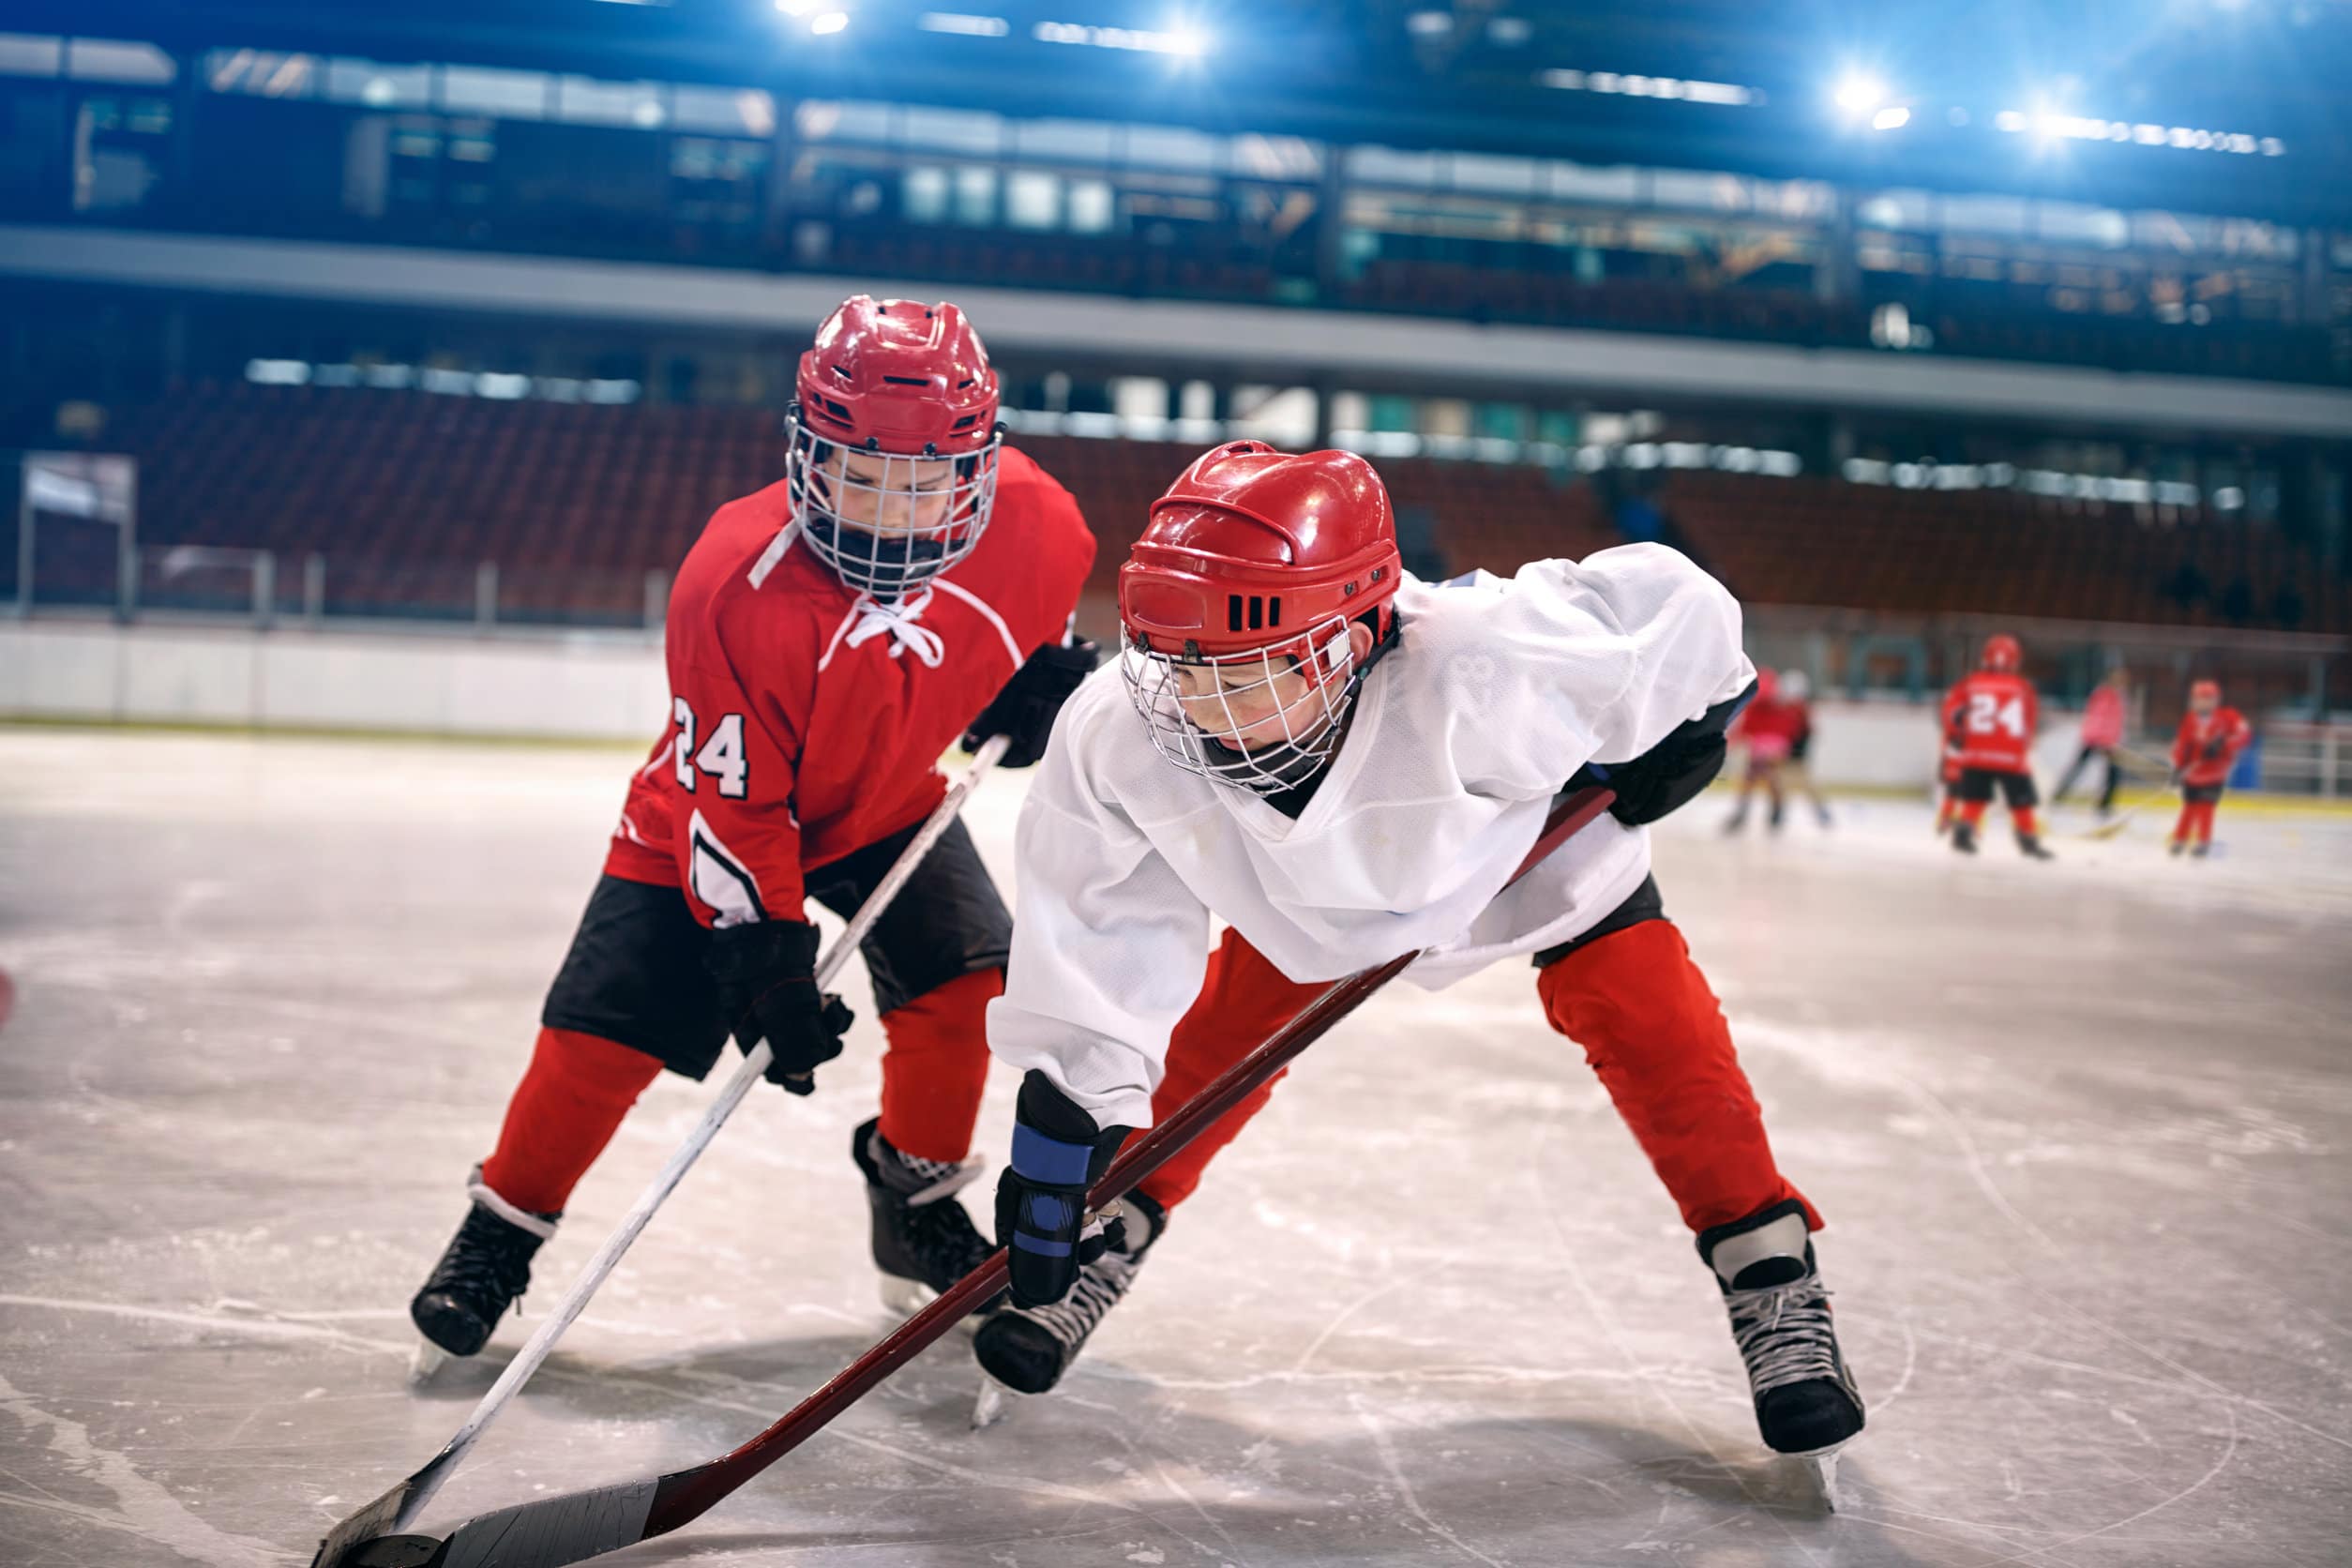 Common Hockey Injuries & How To Prevent Them